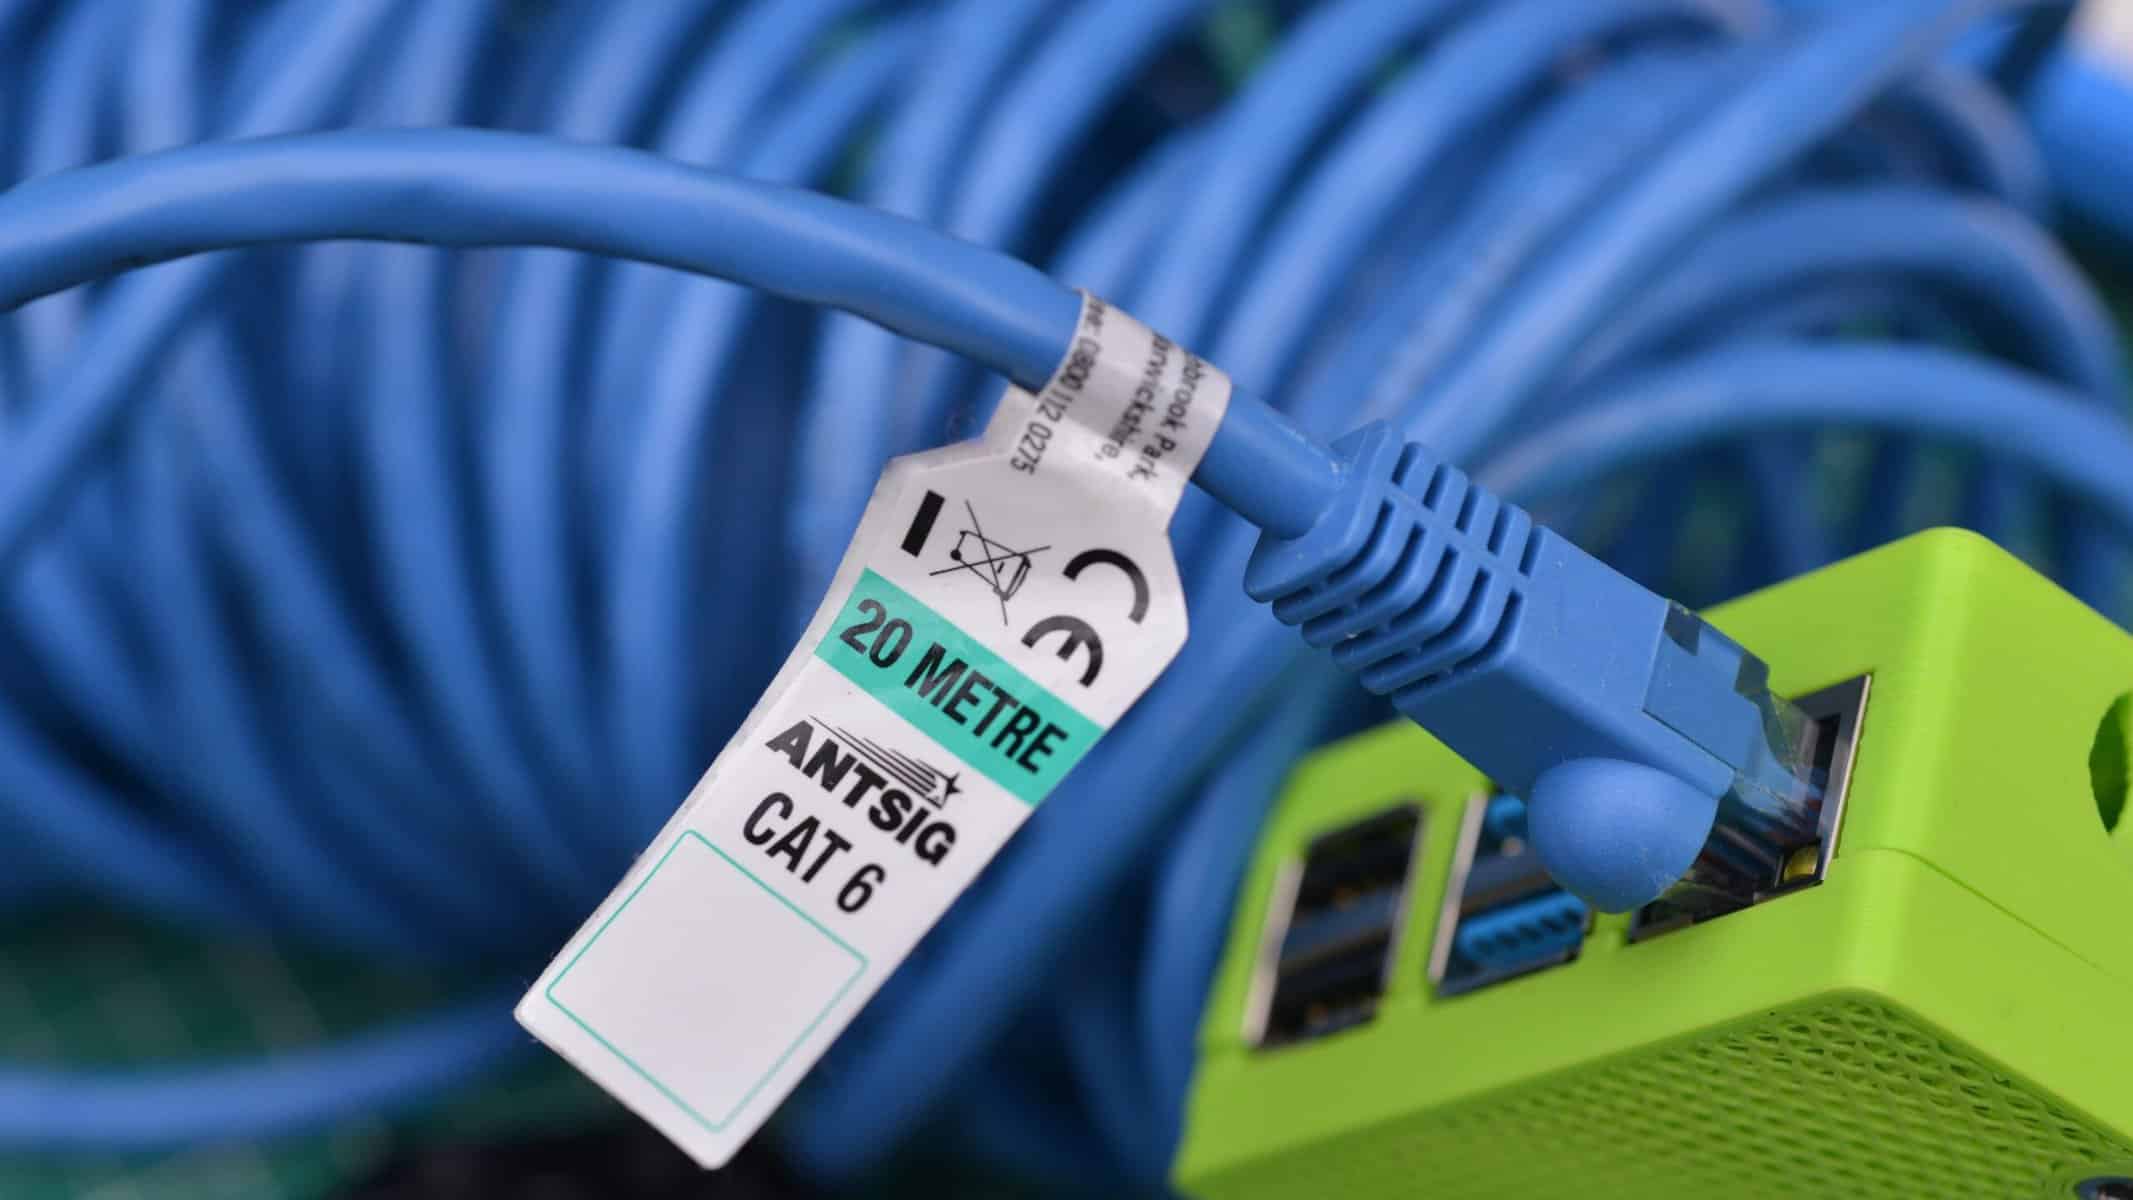 Label on ethernet cable indicating that it is a CAT 6 cable.